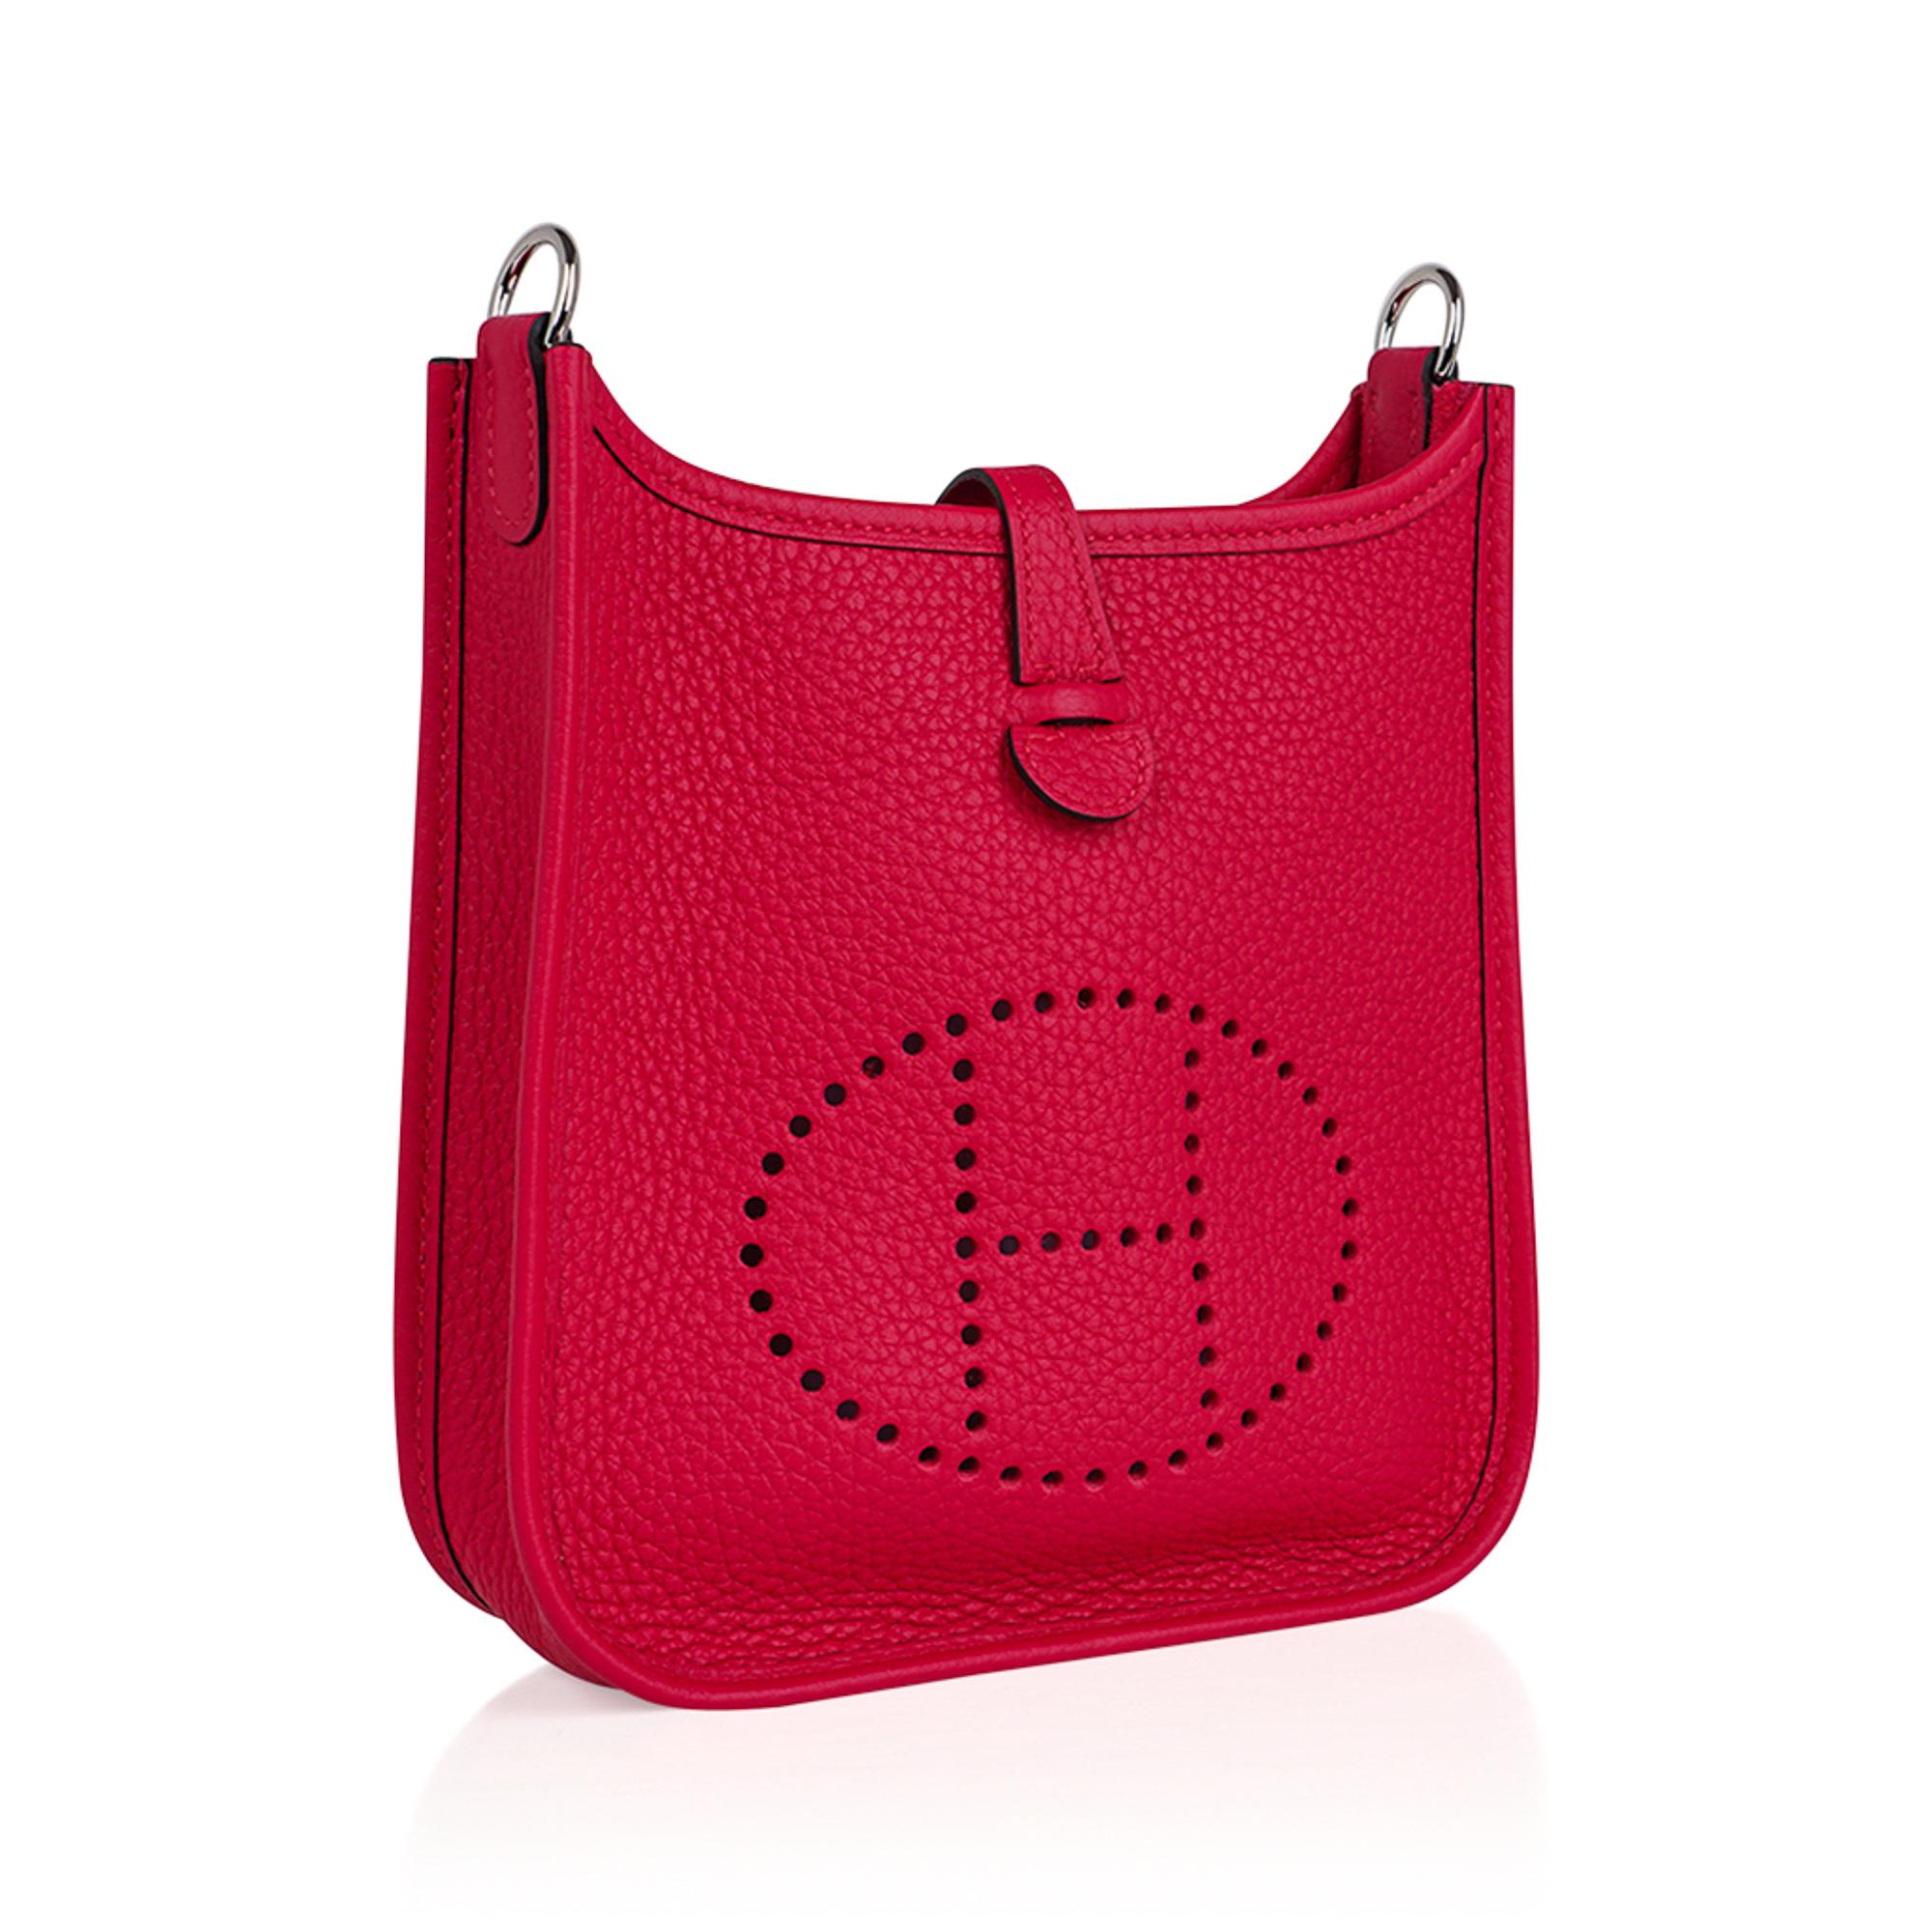 Mightychic offers an Hermes Evelyne TPM featured in saturated Framboise.
Whimsical with charming Flipperball strap.
Clemence leather is soft and scratch resistant.
Signature perforated H on front of bag.
Fresh with Palladium hardware.
Fabulous